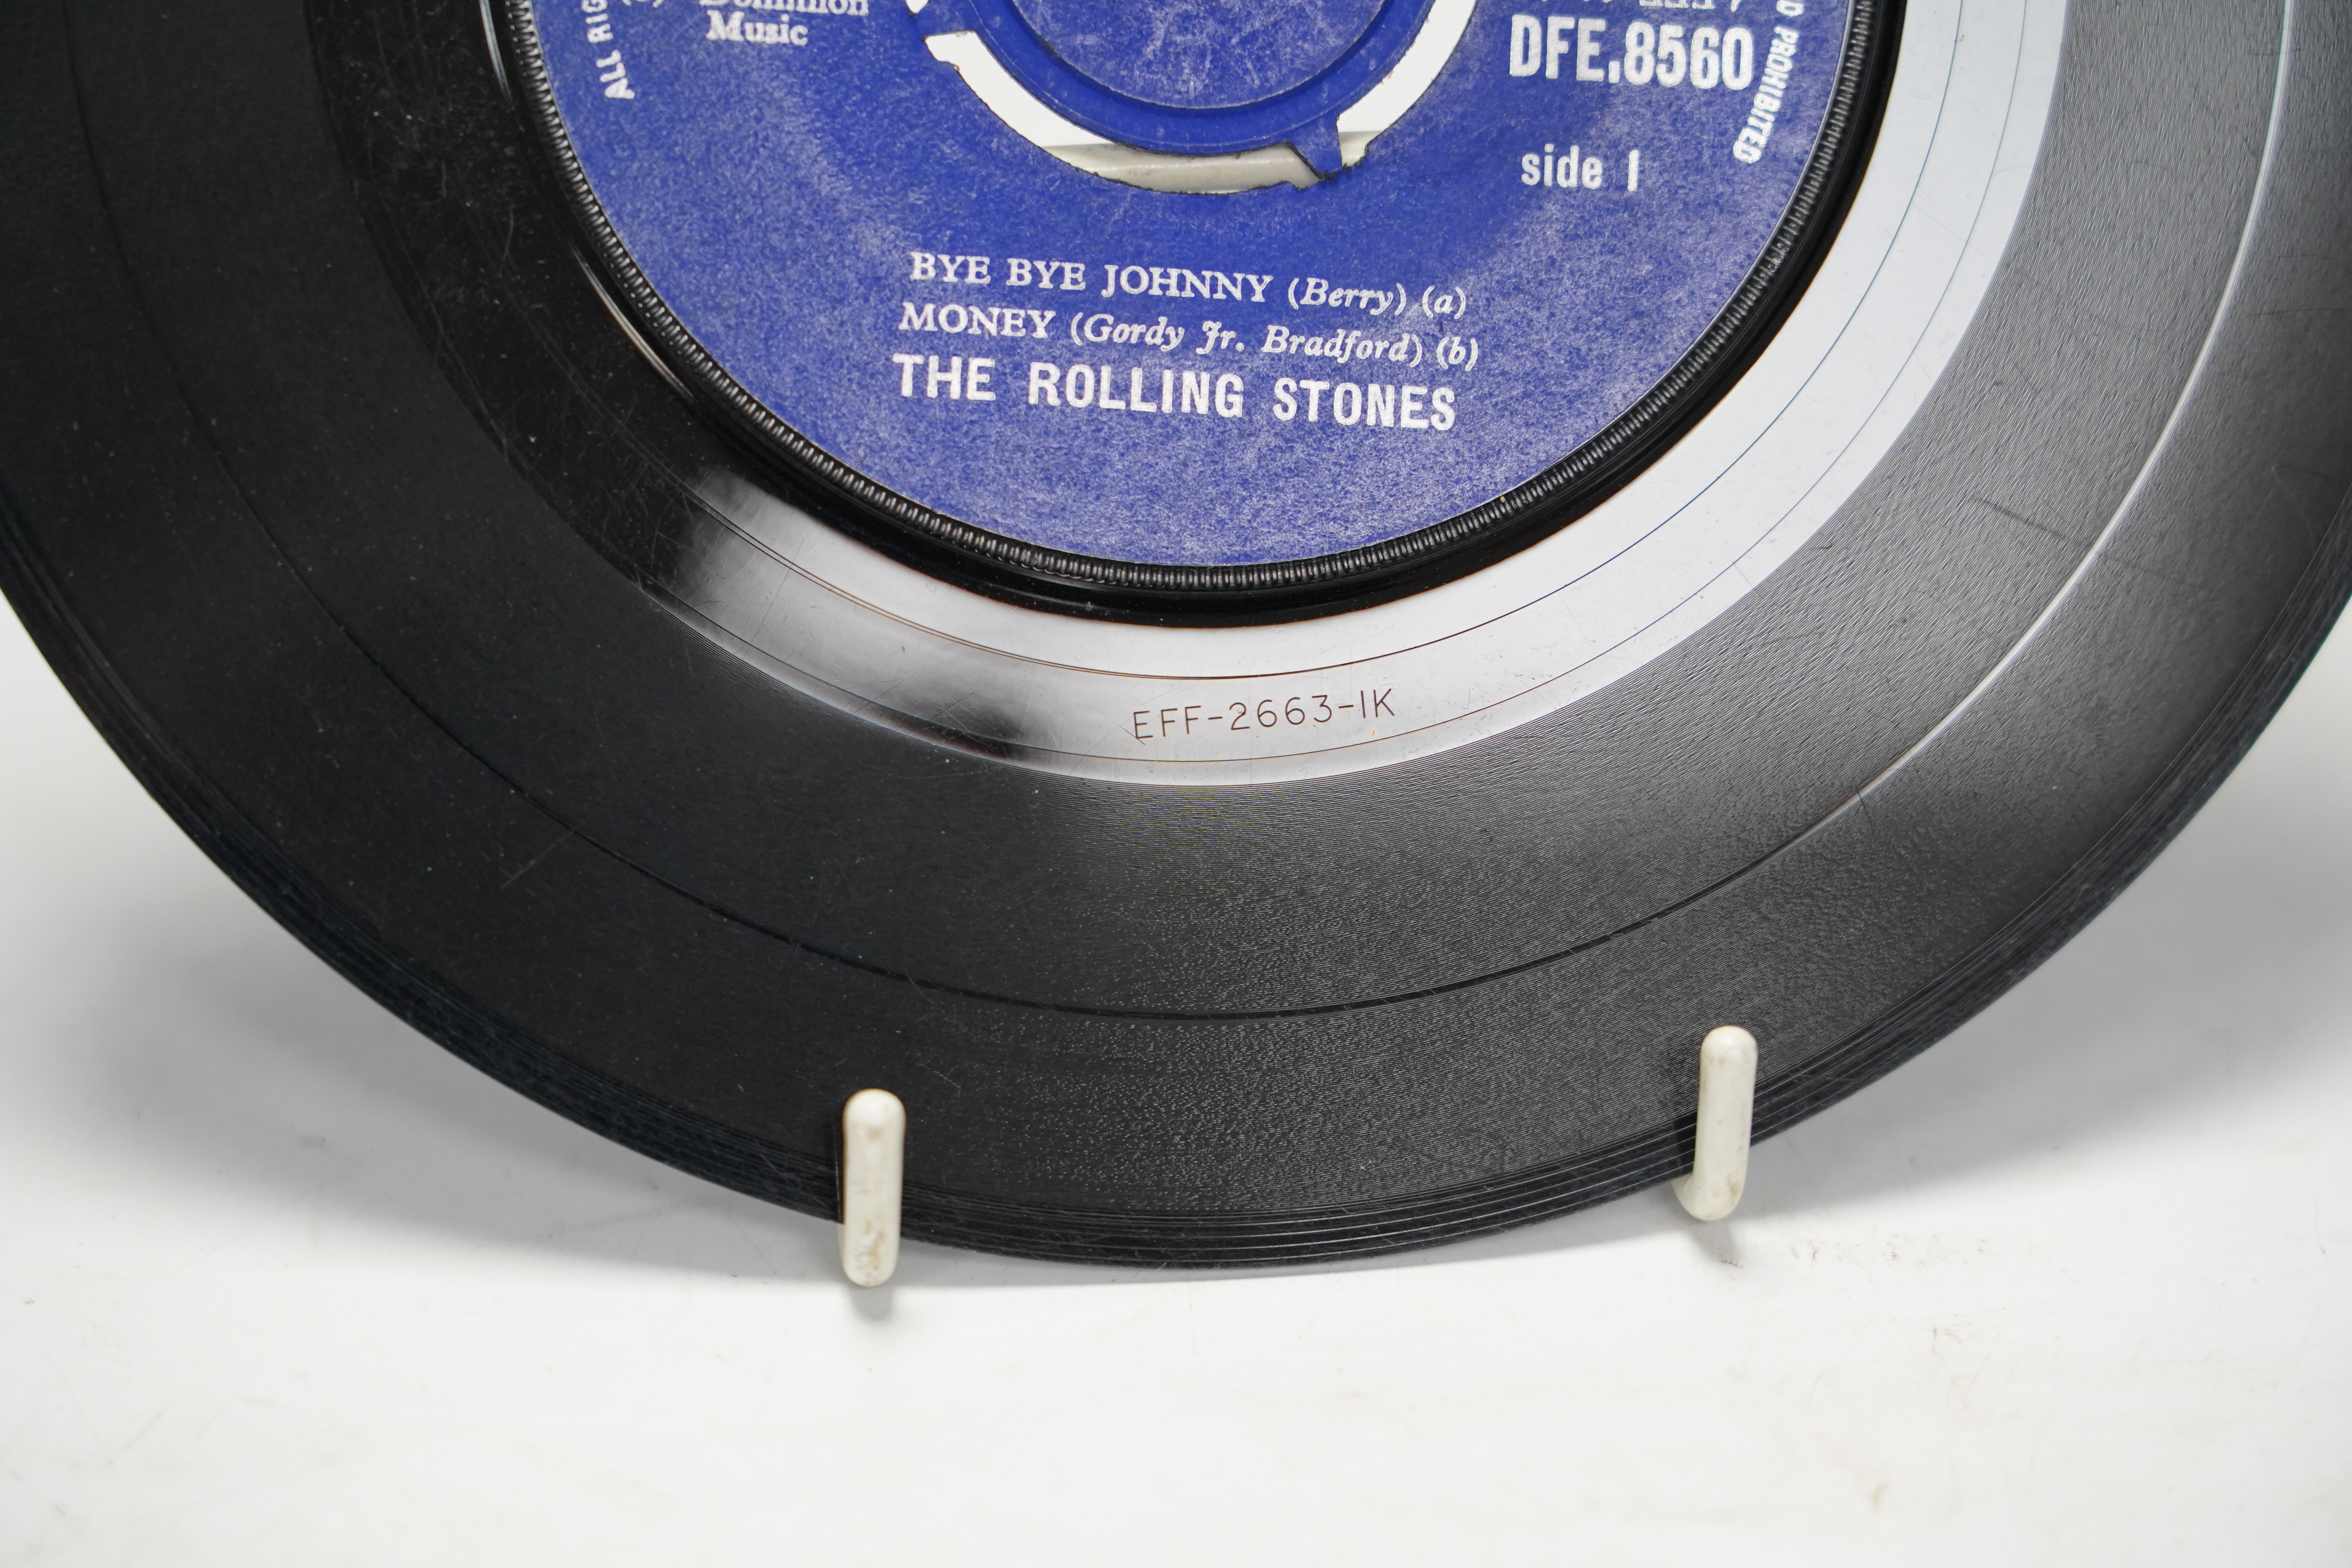 Two Tamla Motown demo 7” singles; Michael Jackson; Got To Be There, and Jr. Walker & the All Stars; Take Me Girl, both with printed demo labels, together with nine other 7” singles by The Beatles, The Rolling Stones and